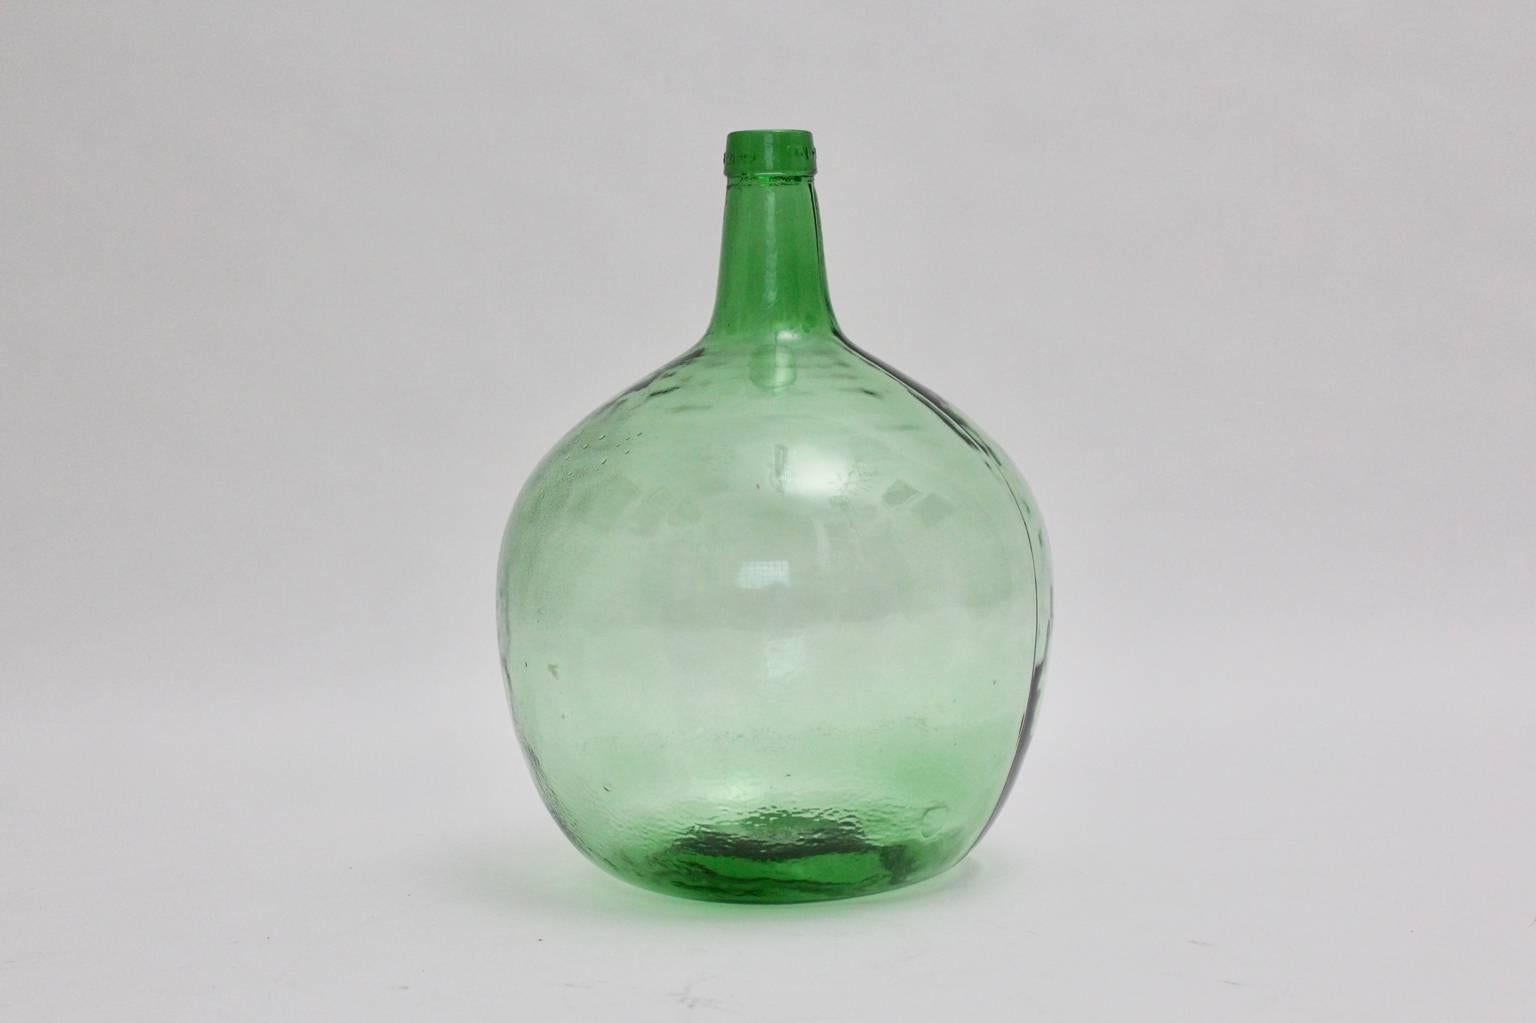 Green vessel or Demijohn by Viresa, 1970s, which is very decorating and would work perfect as a flower vessel.
Throughout the beautiful emerald bright green color tone and the round shape the green vintage glass vessel would be an amazing detail in